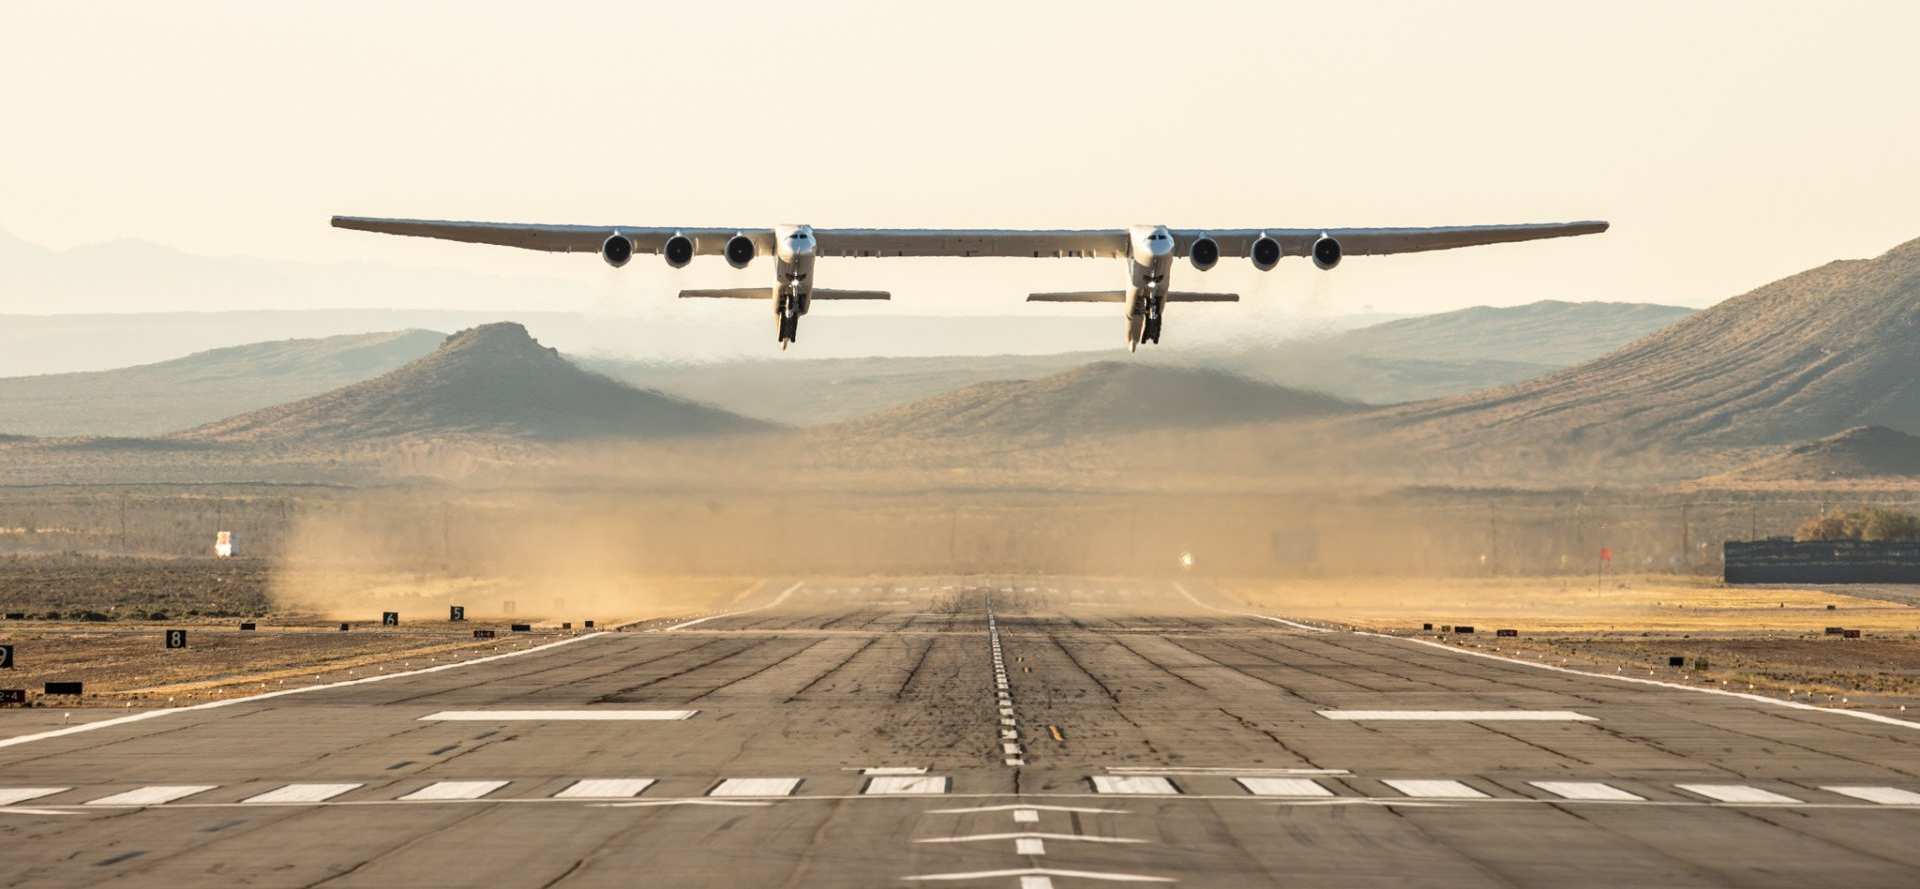 Largest Airplane By Wingspan: Stratolaunch